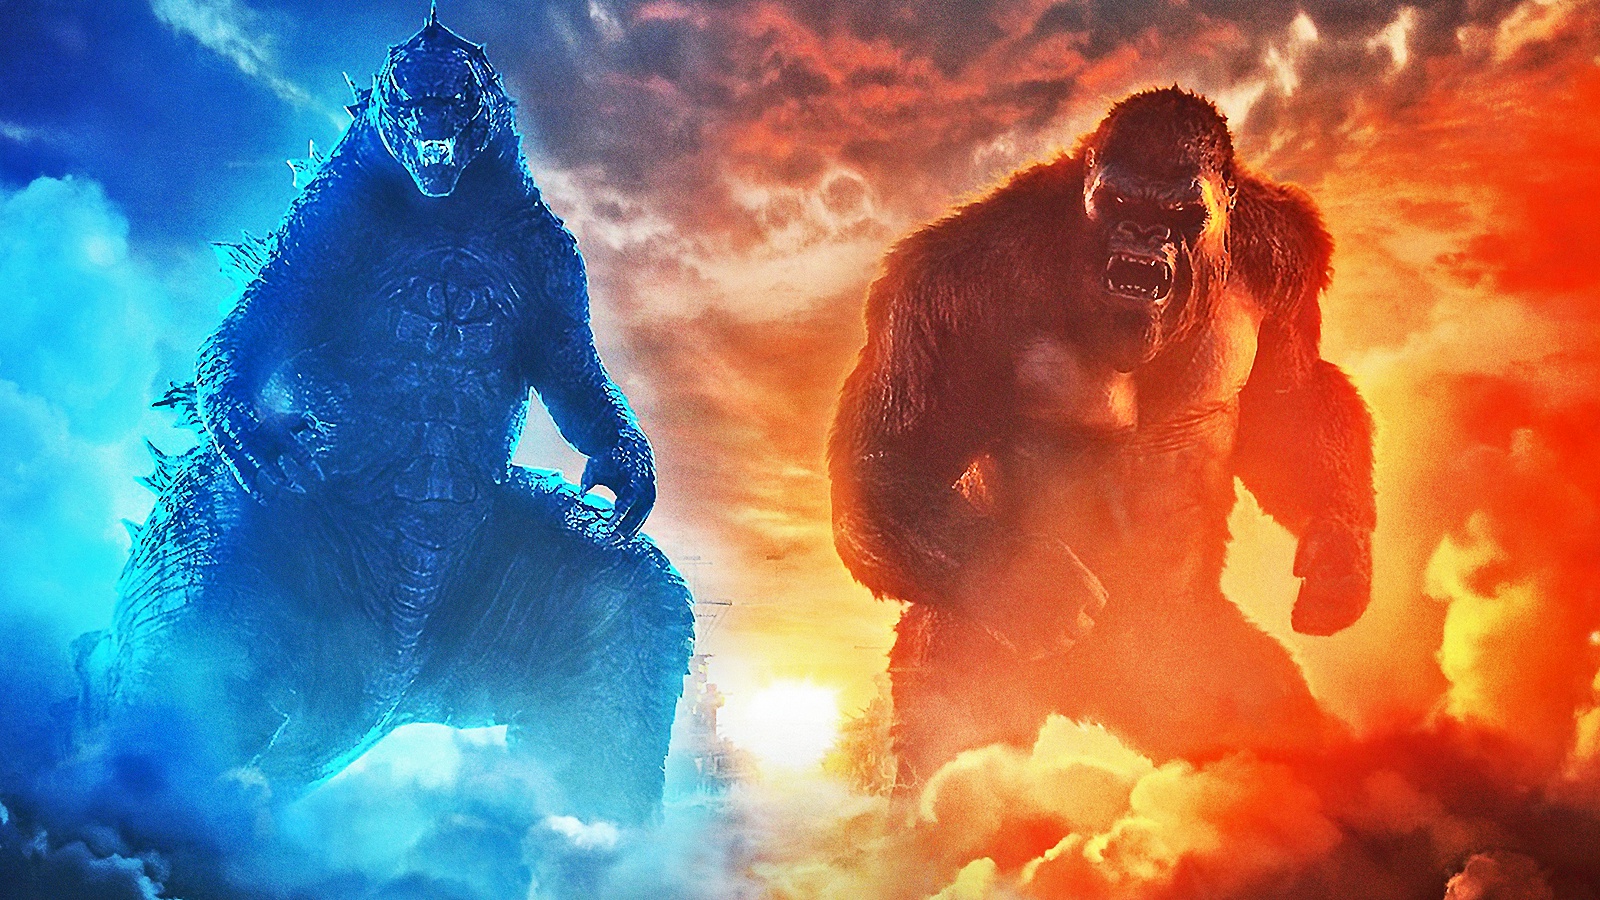 MonsterVerse, the cinematic future (and more) of the Godzilla and King Kong universe